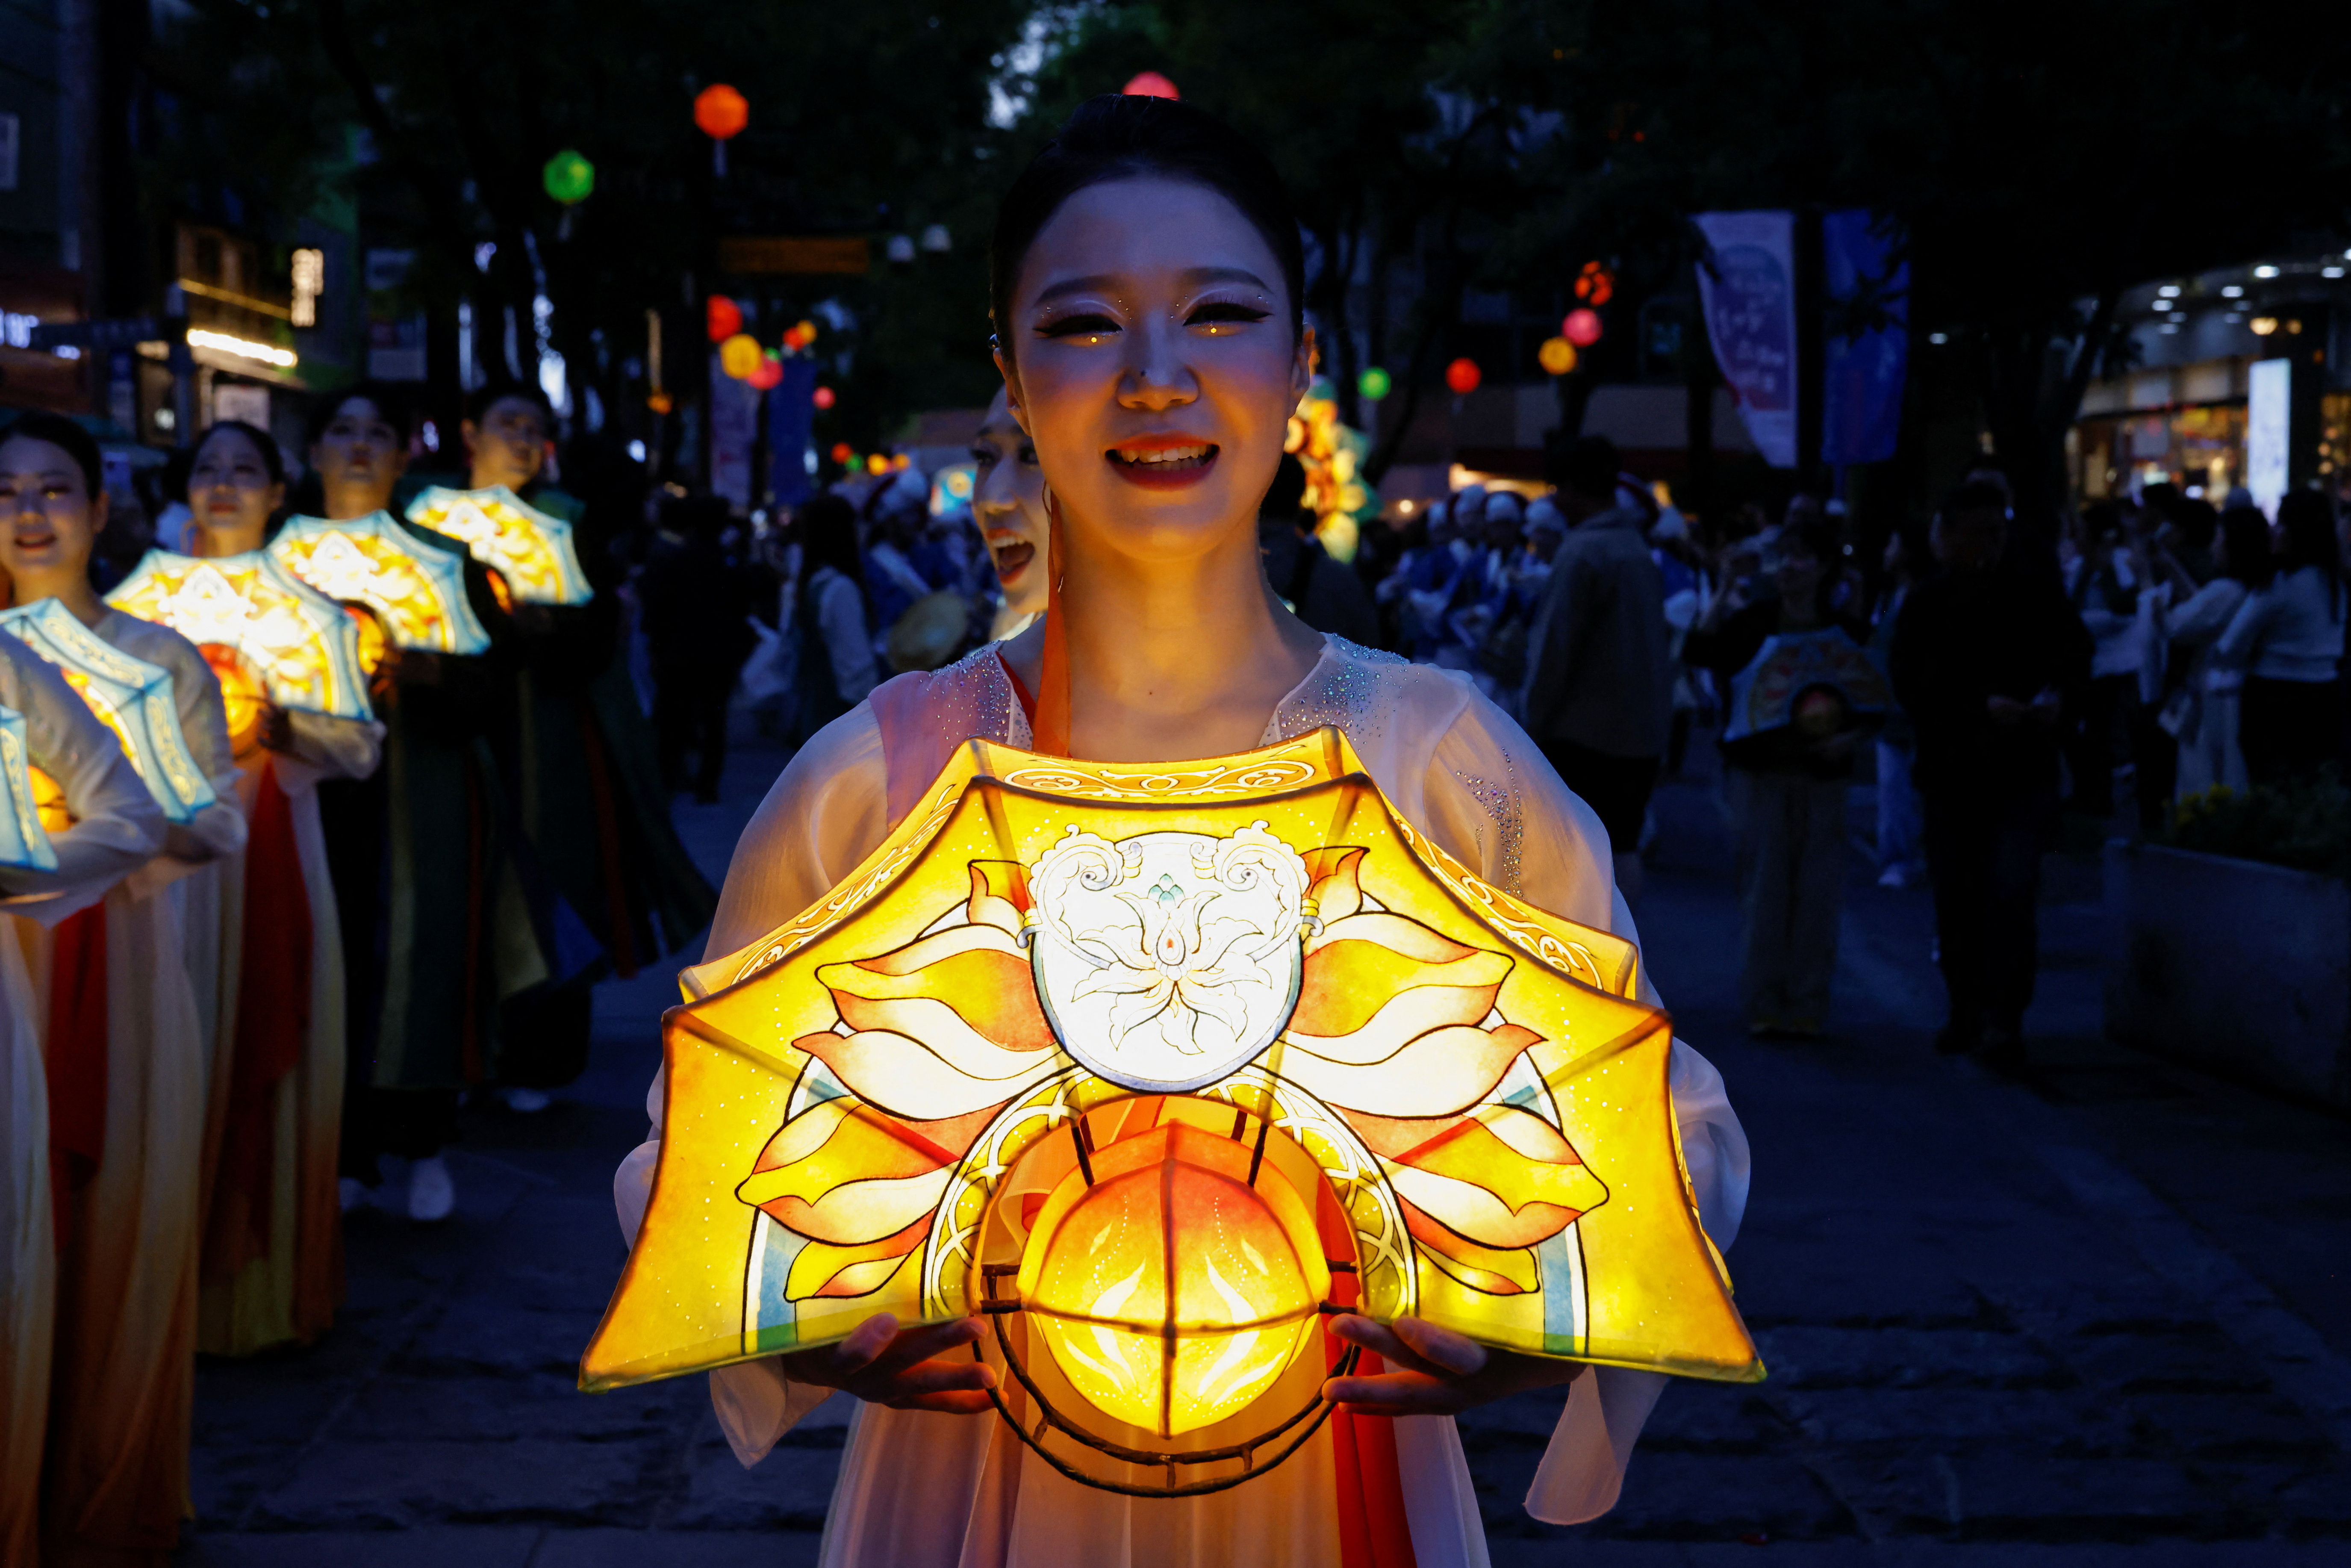 Lotus Lantern Parade and EDM party in celebration of the upcoming birthday of Buddha in Seoul